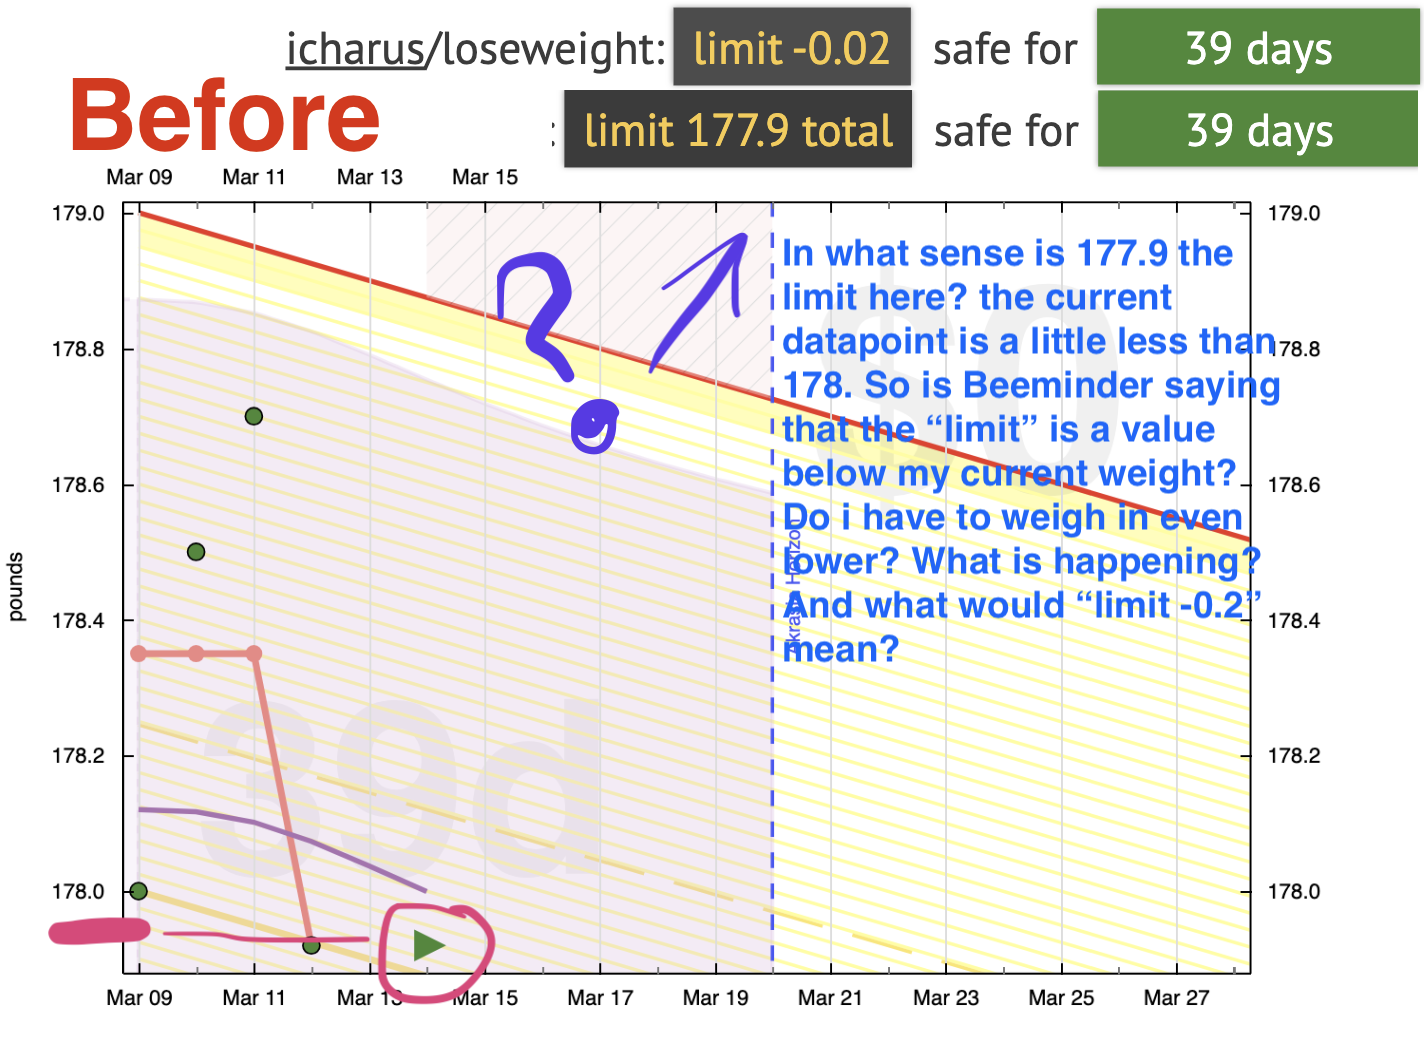 Before image showing a weight loss goal. Annotations: In what sense is the 177.9 the limit here? The current datapoint is a little less than 178. So is Beeminder saying that the 'limit' is a value below my current weight? Do I hve to weigh in even lower? What is happening? And what would 'limit -0.2' mean?